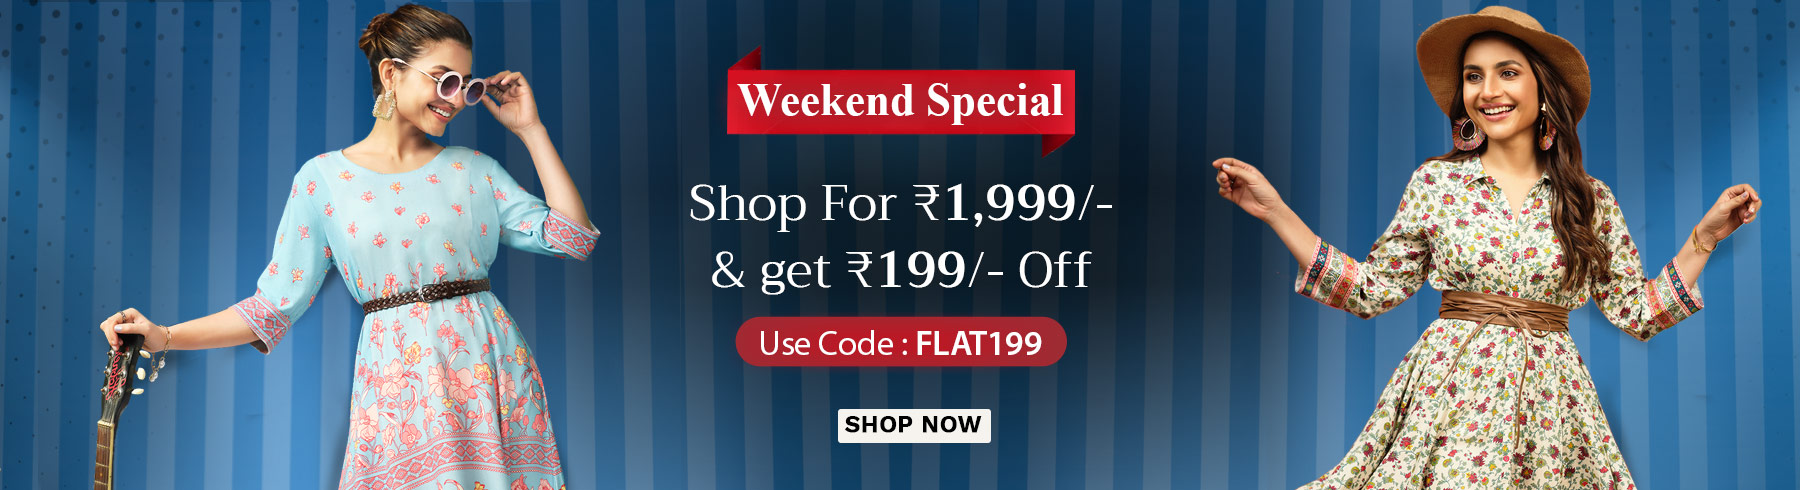 weekend special flat199 off